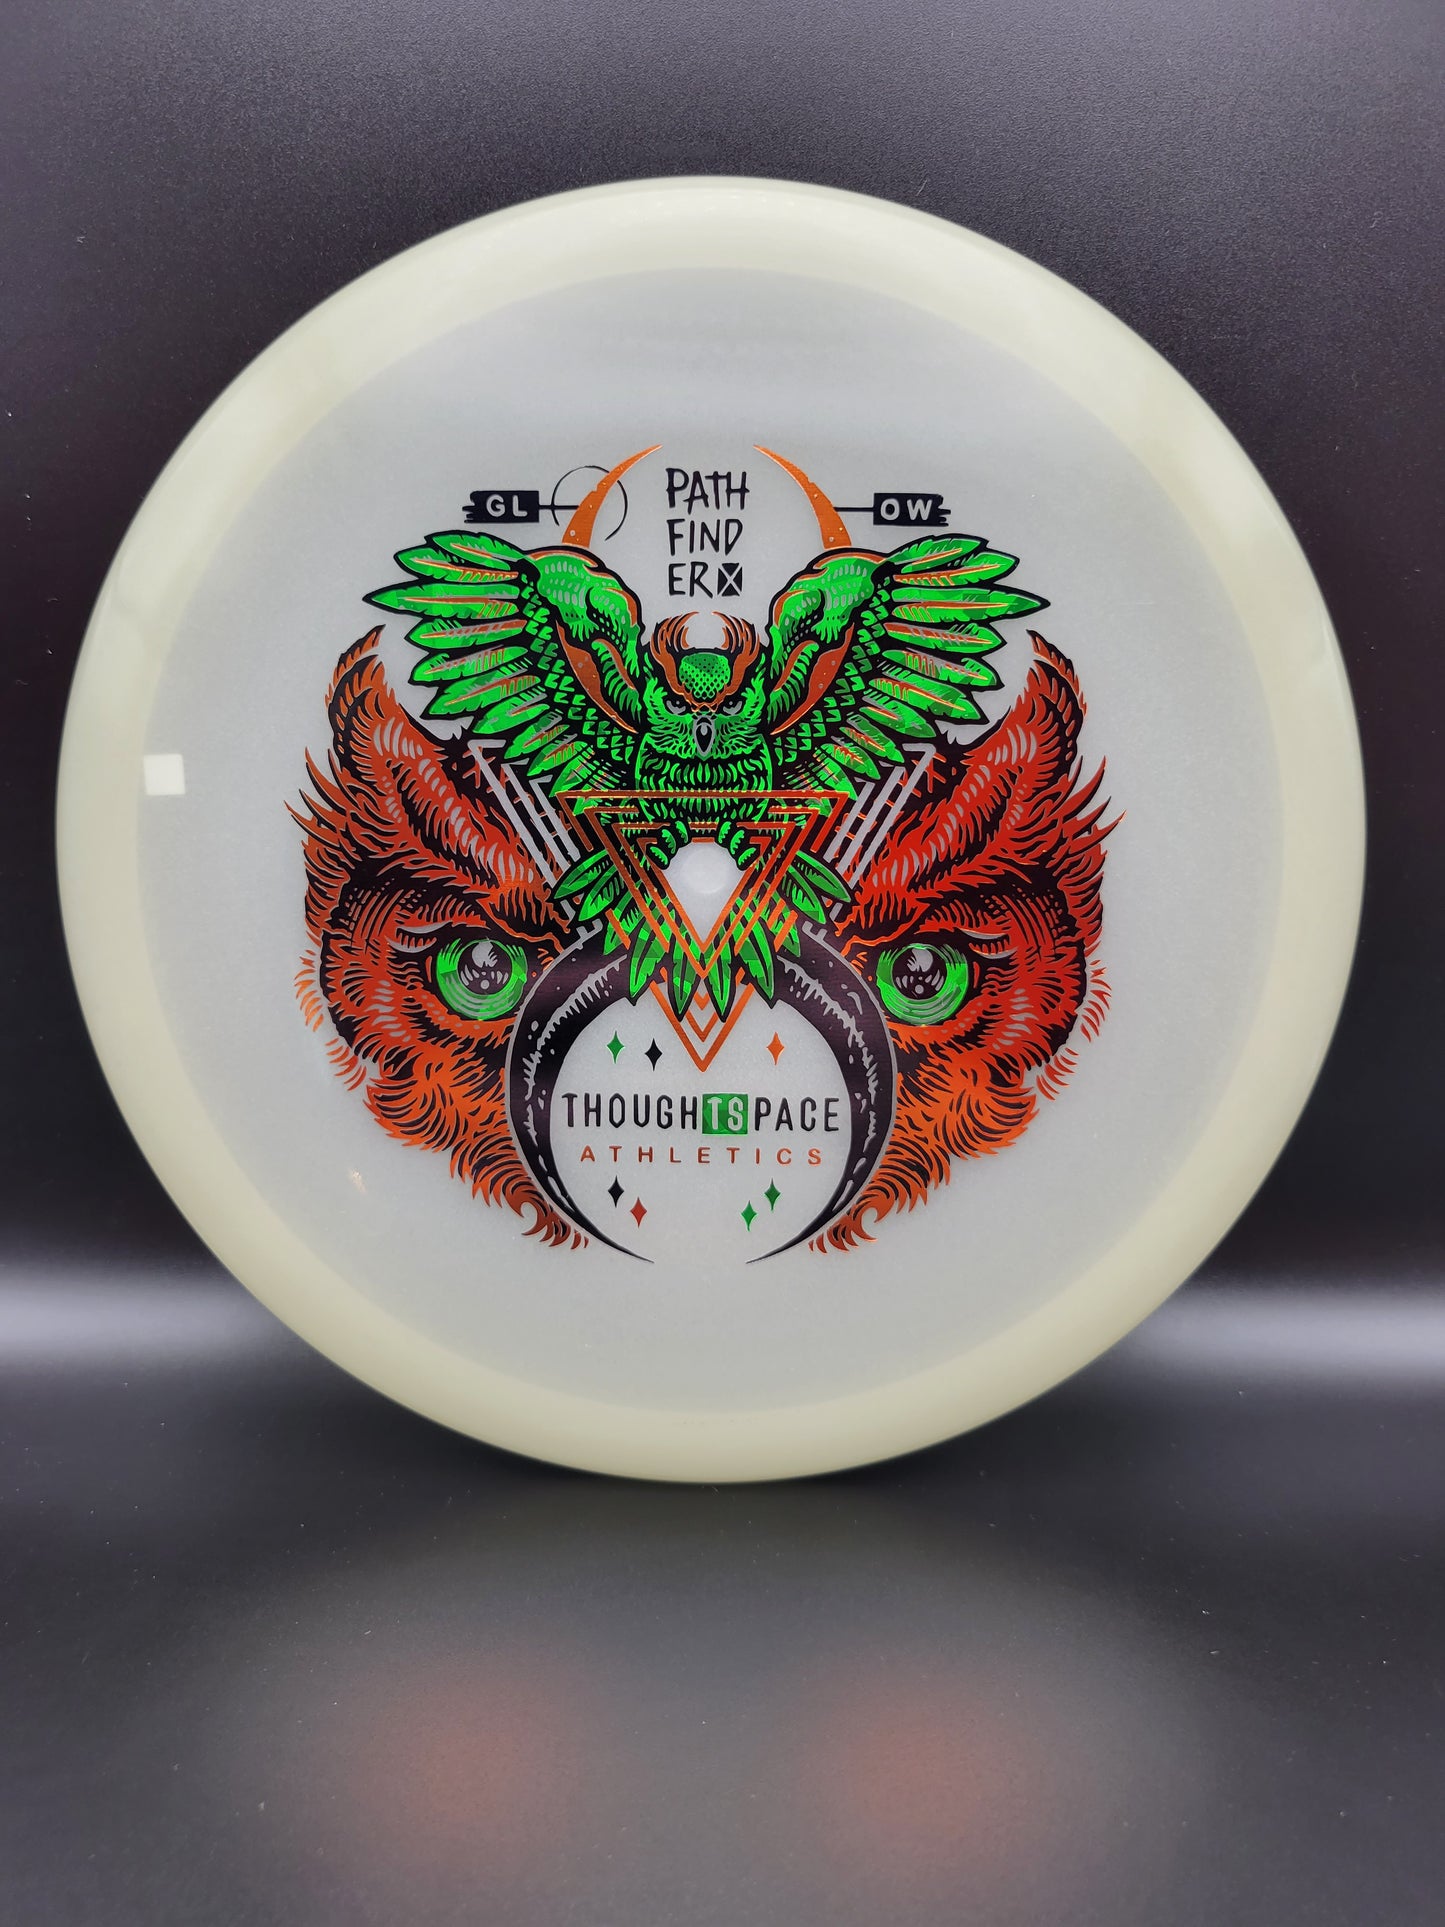 Thought Space Athletics Glow Pathfinder (Fly By Night Stamp)